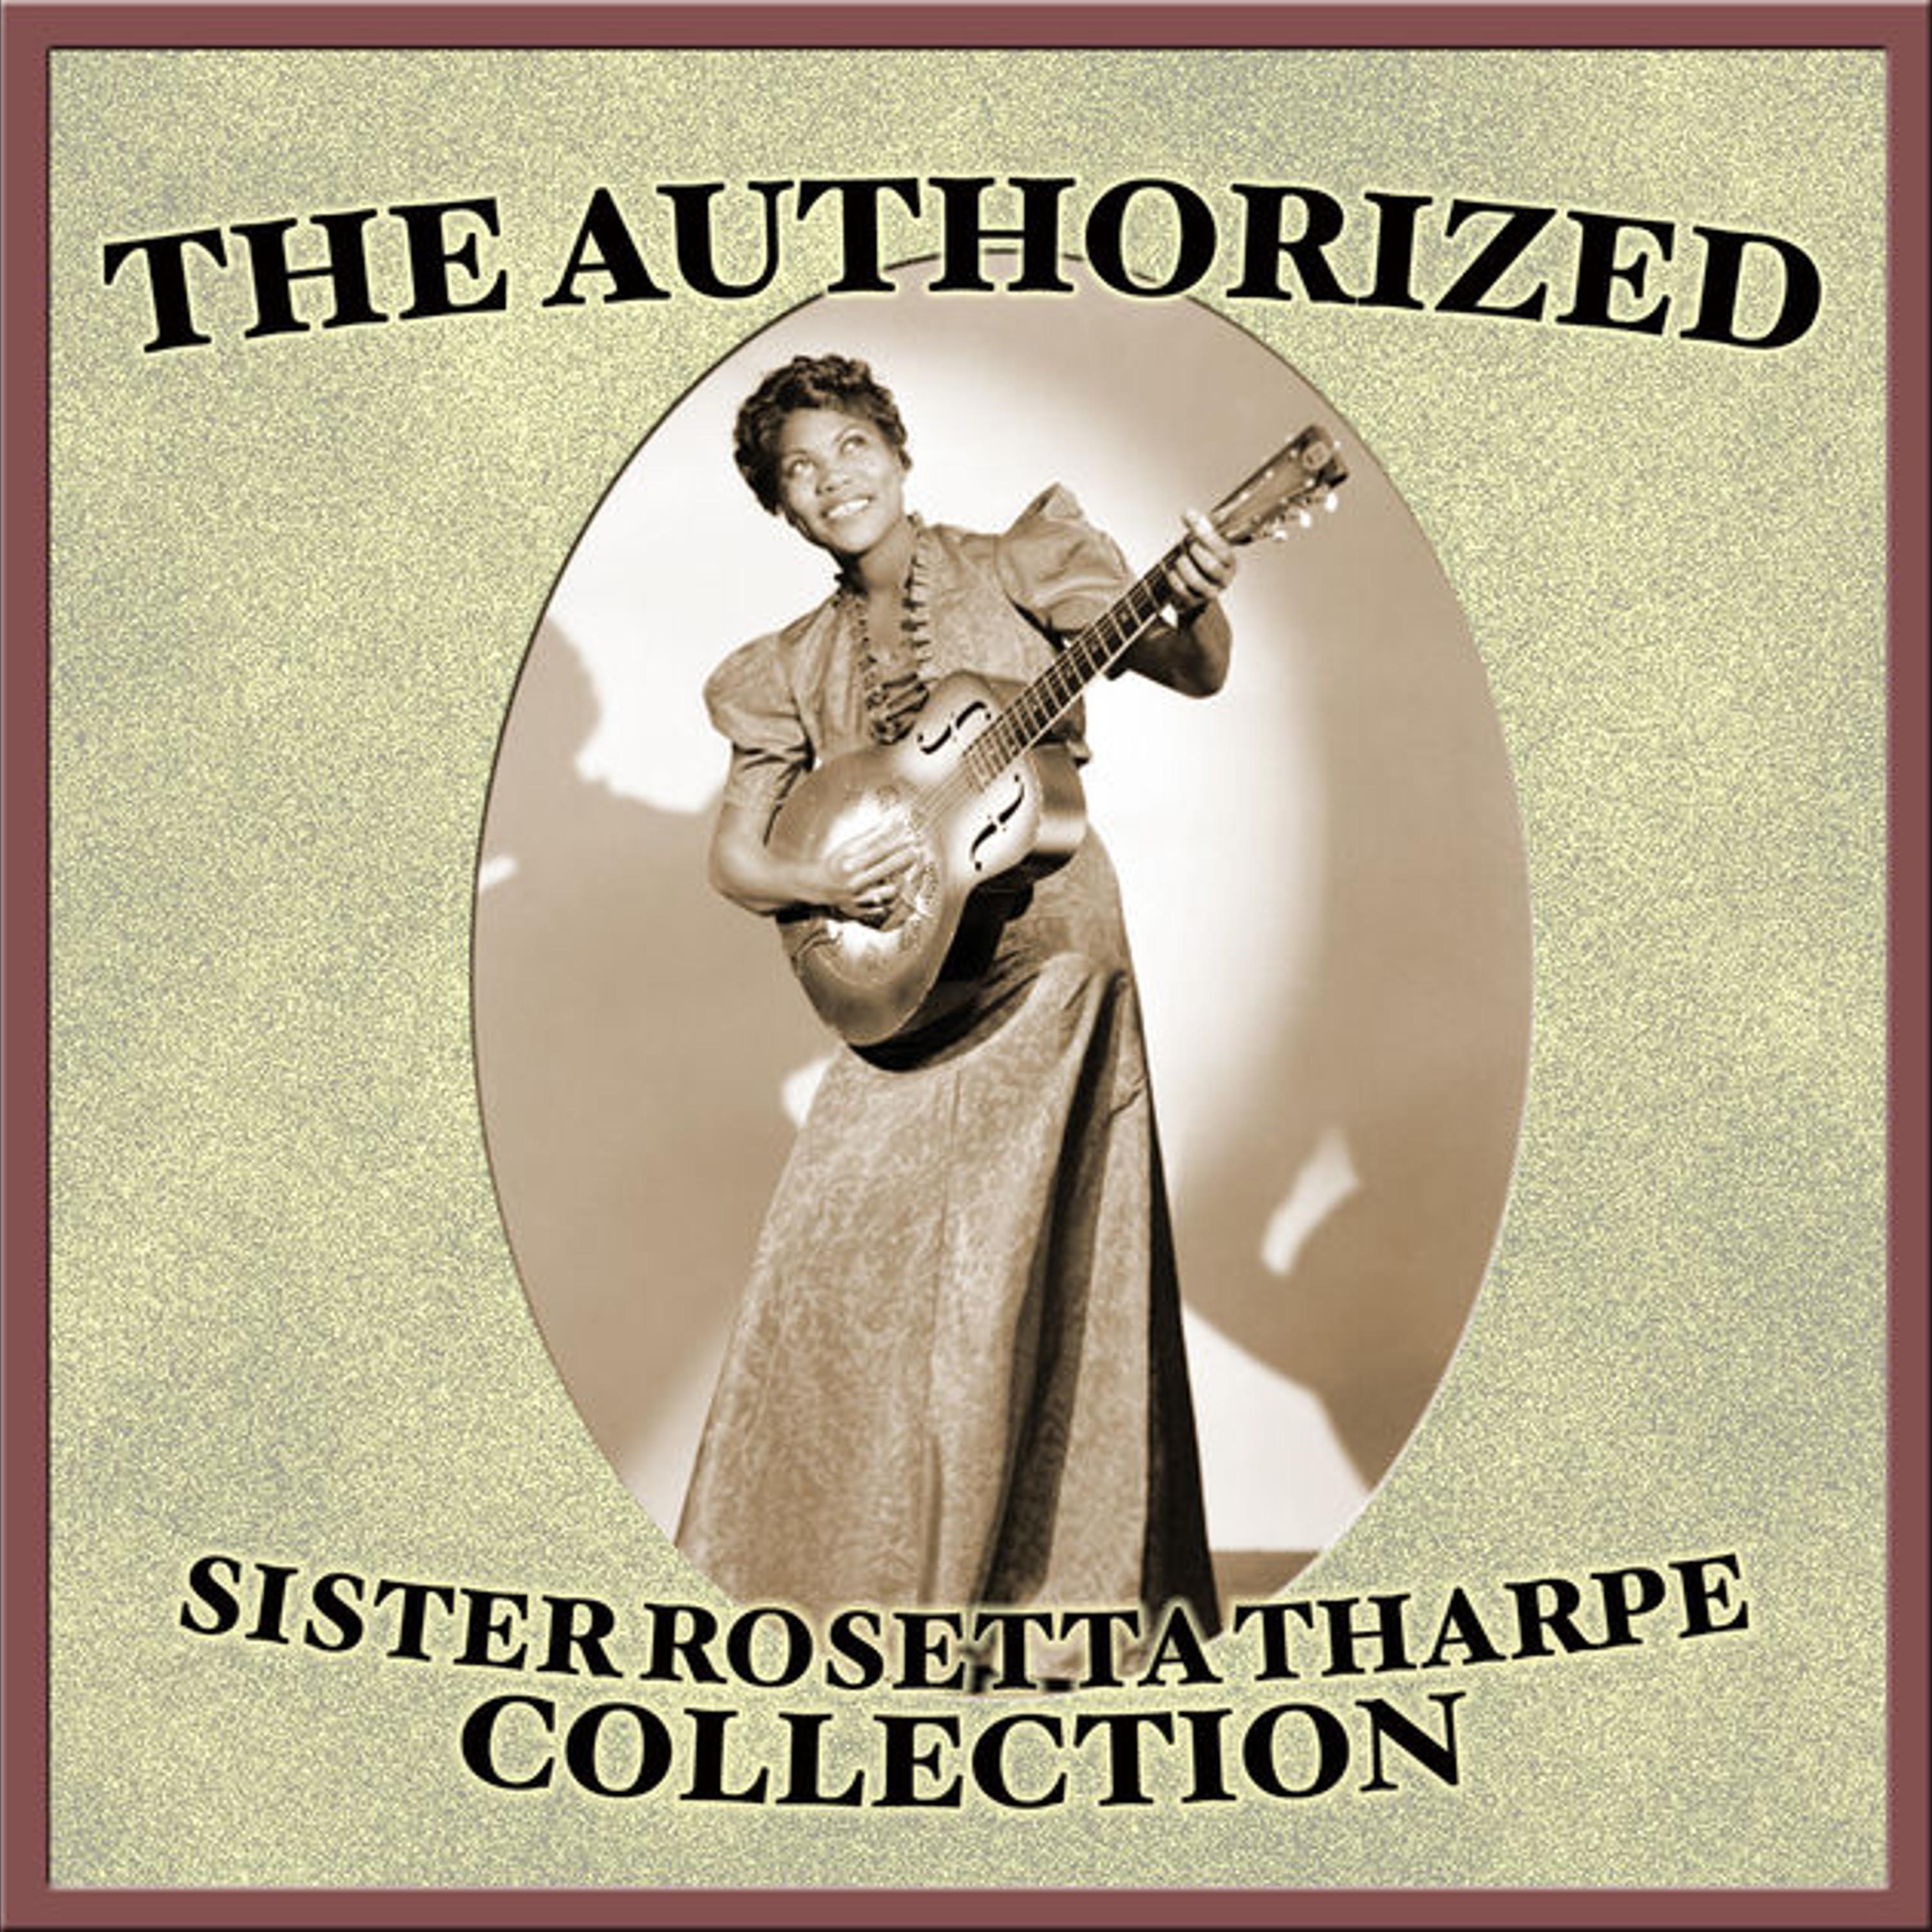 The Authorized Sister Rosetta Tharpe Collection